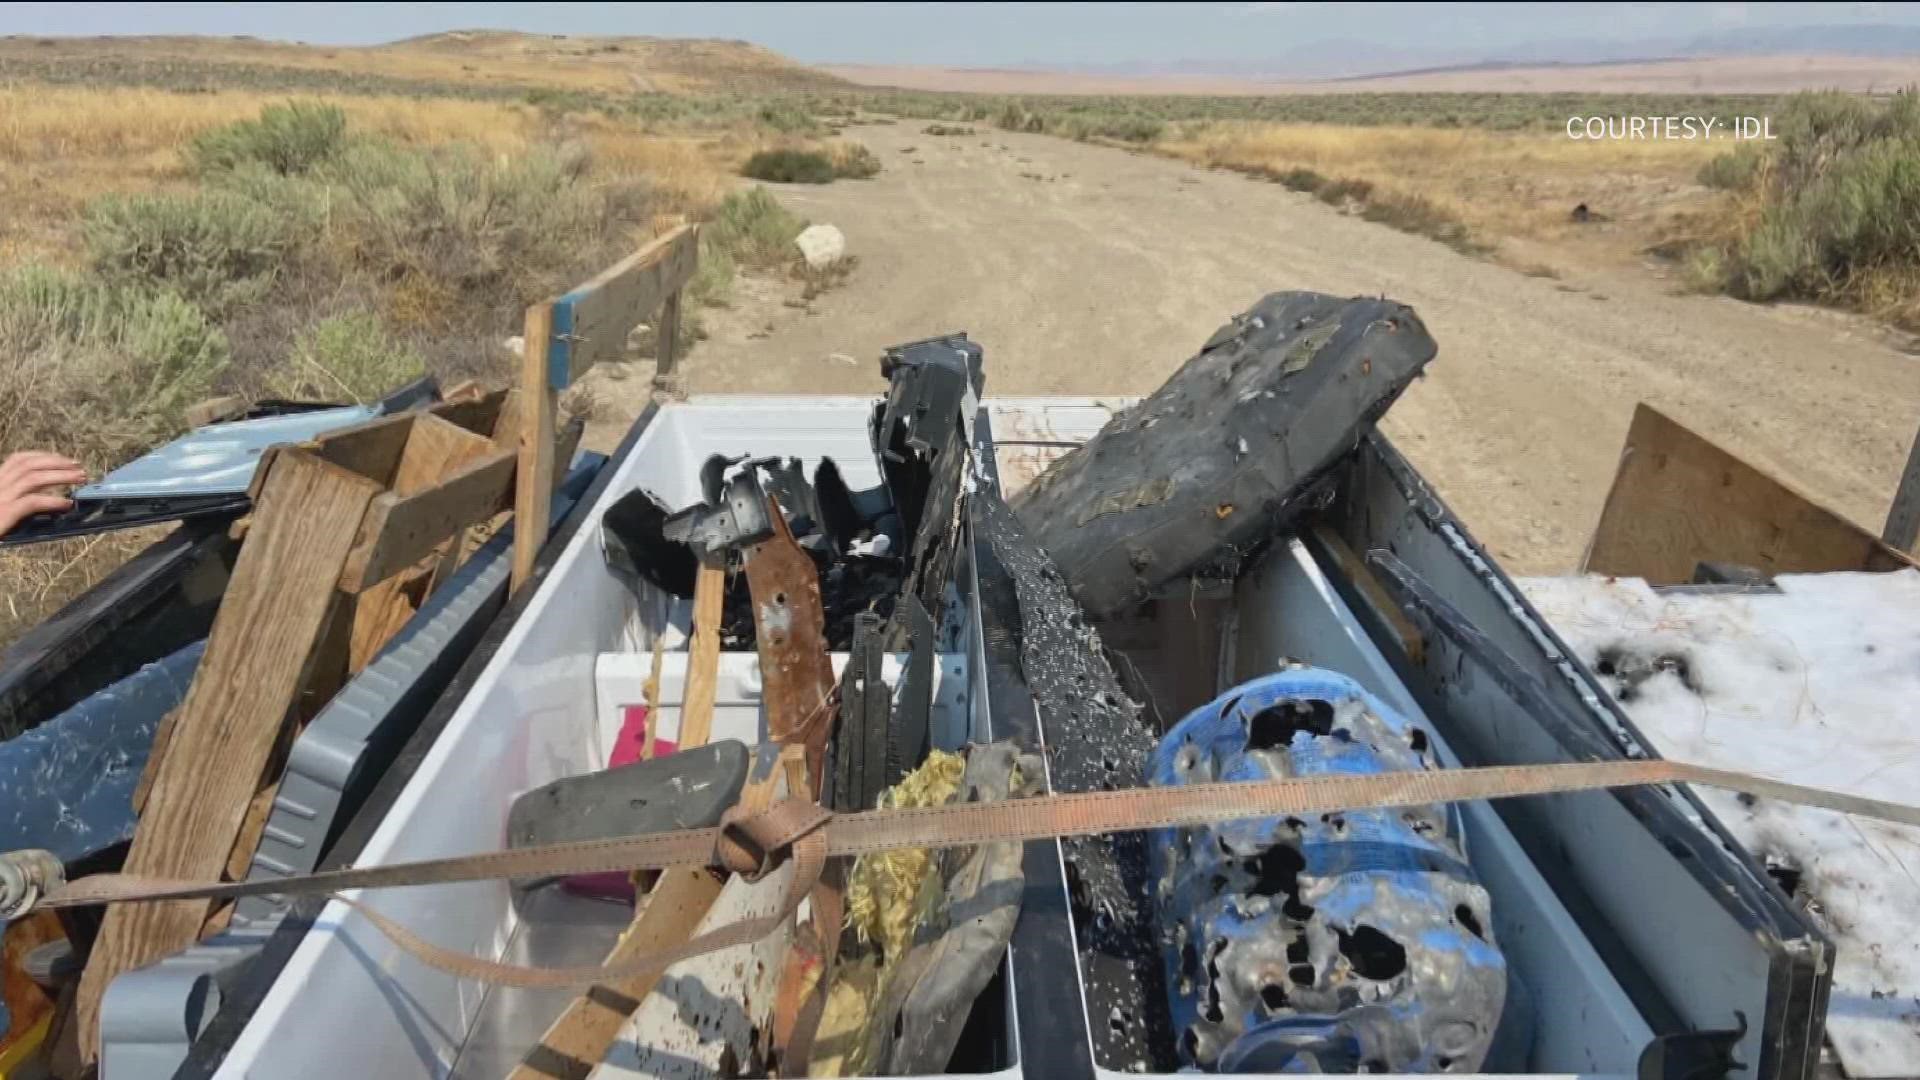 The Idaho Department of Lands filled two trailers and two pickup truck beds with trash that was illegally dumped on endowment land near Mountain Home.